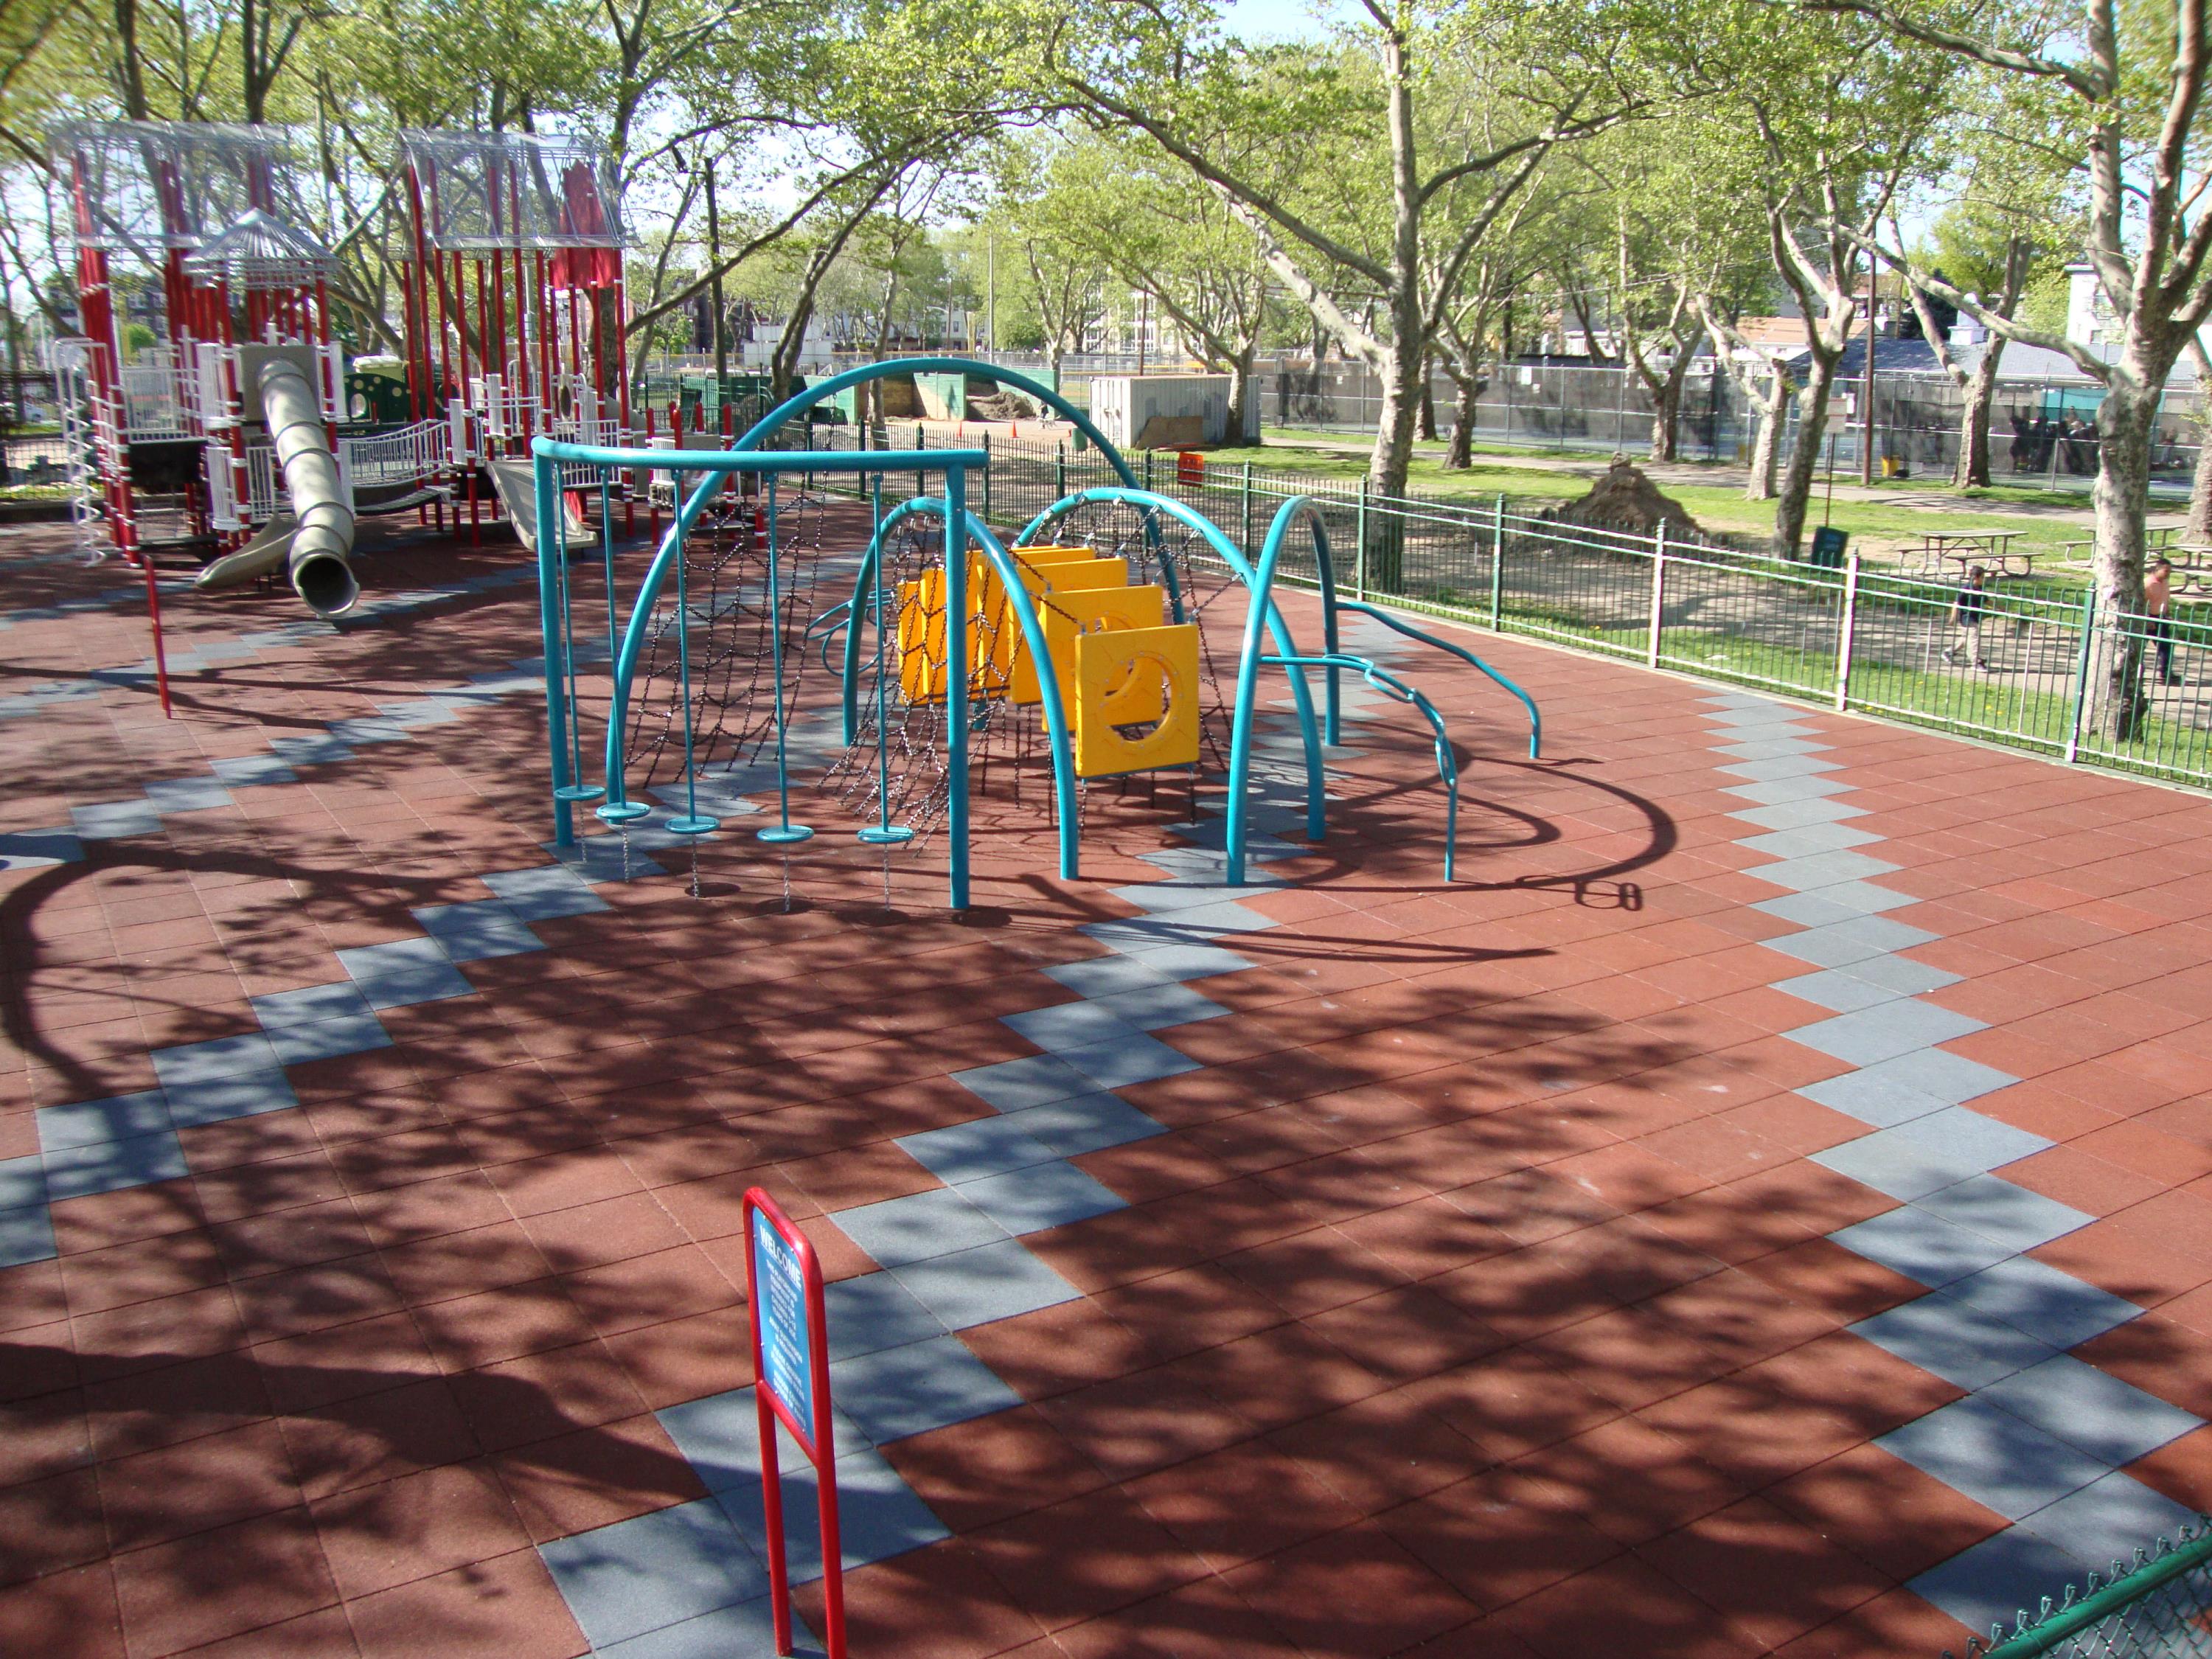 Large Public Park with Multiple Playgrounds Using Designs j